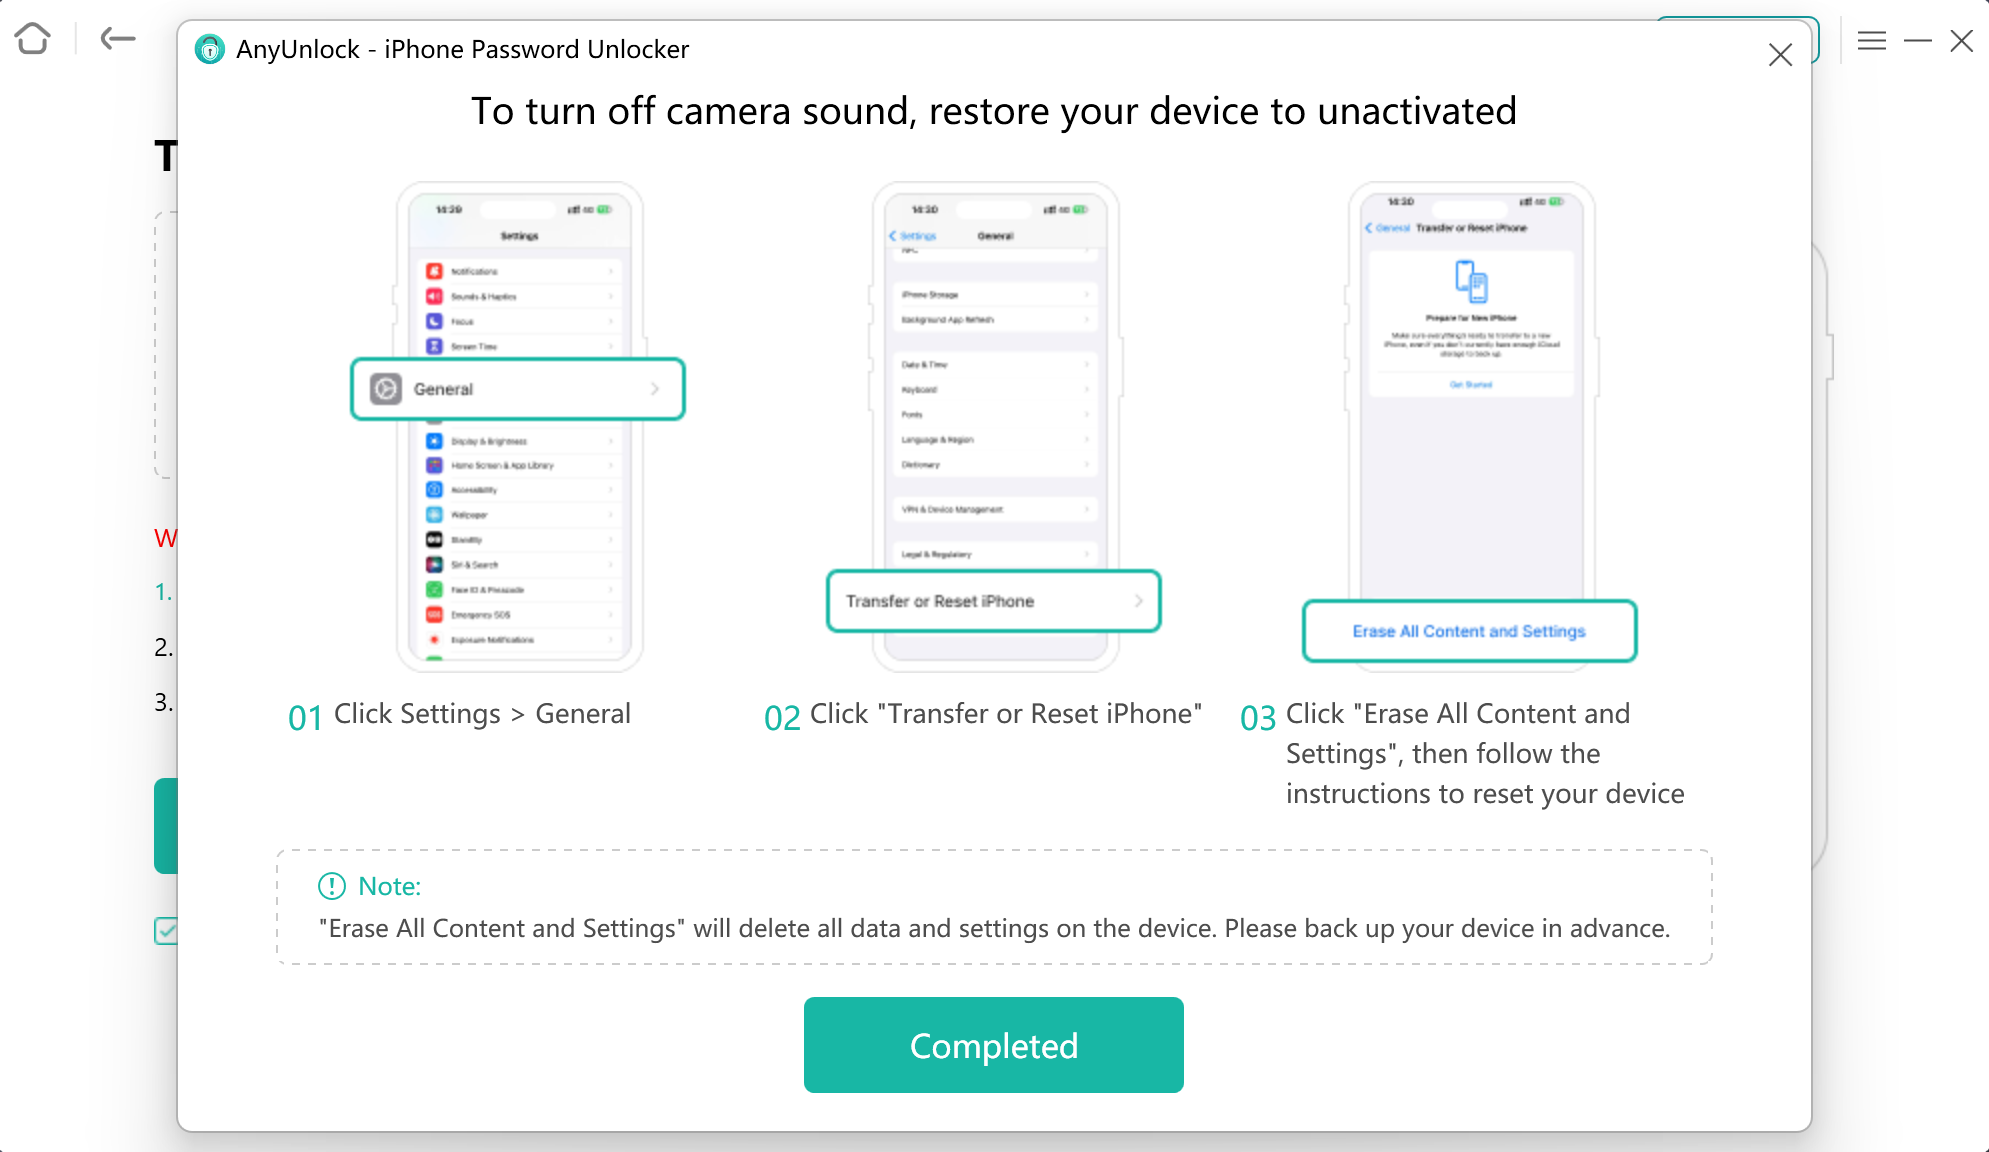 Restore the Device to an Unactivated State